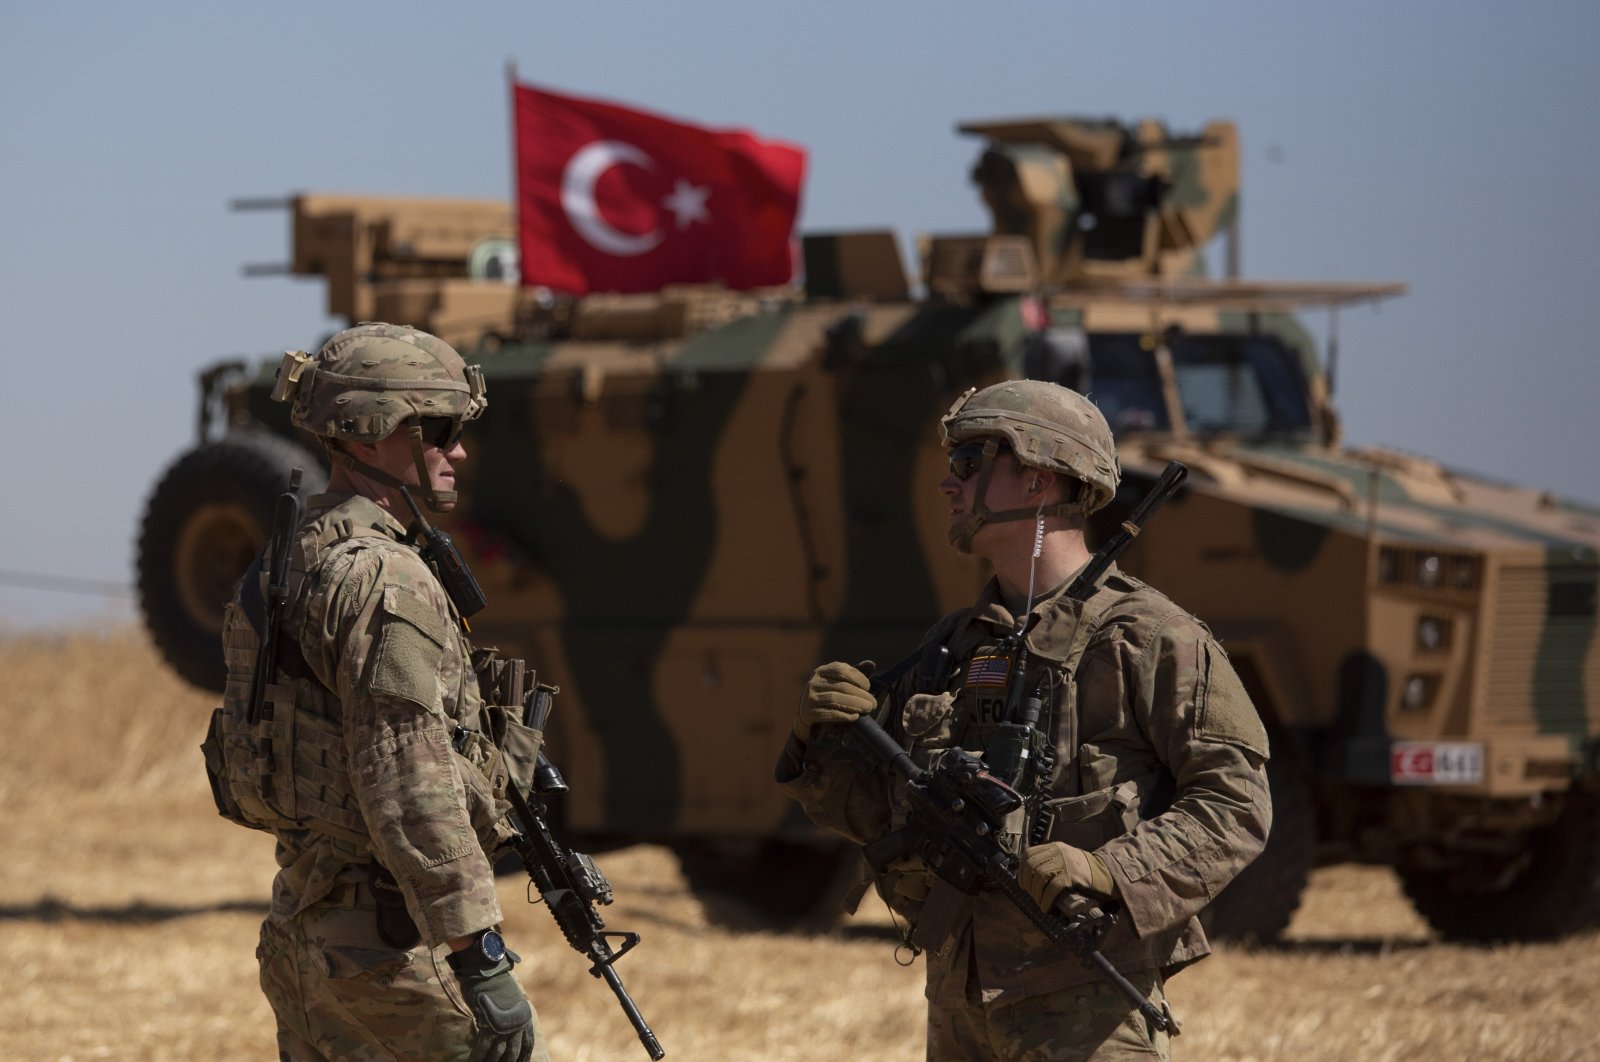 Soldiers stand near a Turkish armored vehicle during the first American-Turkish joint patrol in the so-called "safe zone" on the Syrian side of the border with Turkey near Tal Abyad, Syria, Sept. 8, 2019. (AP File Photo)